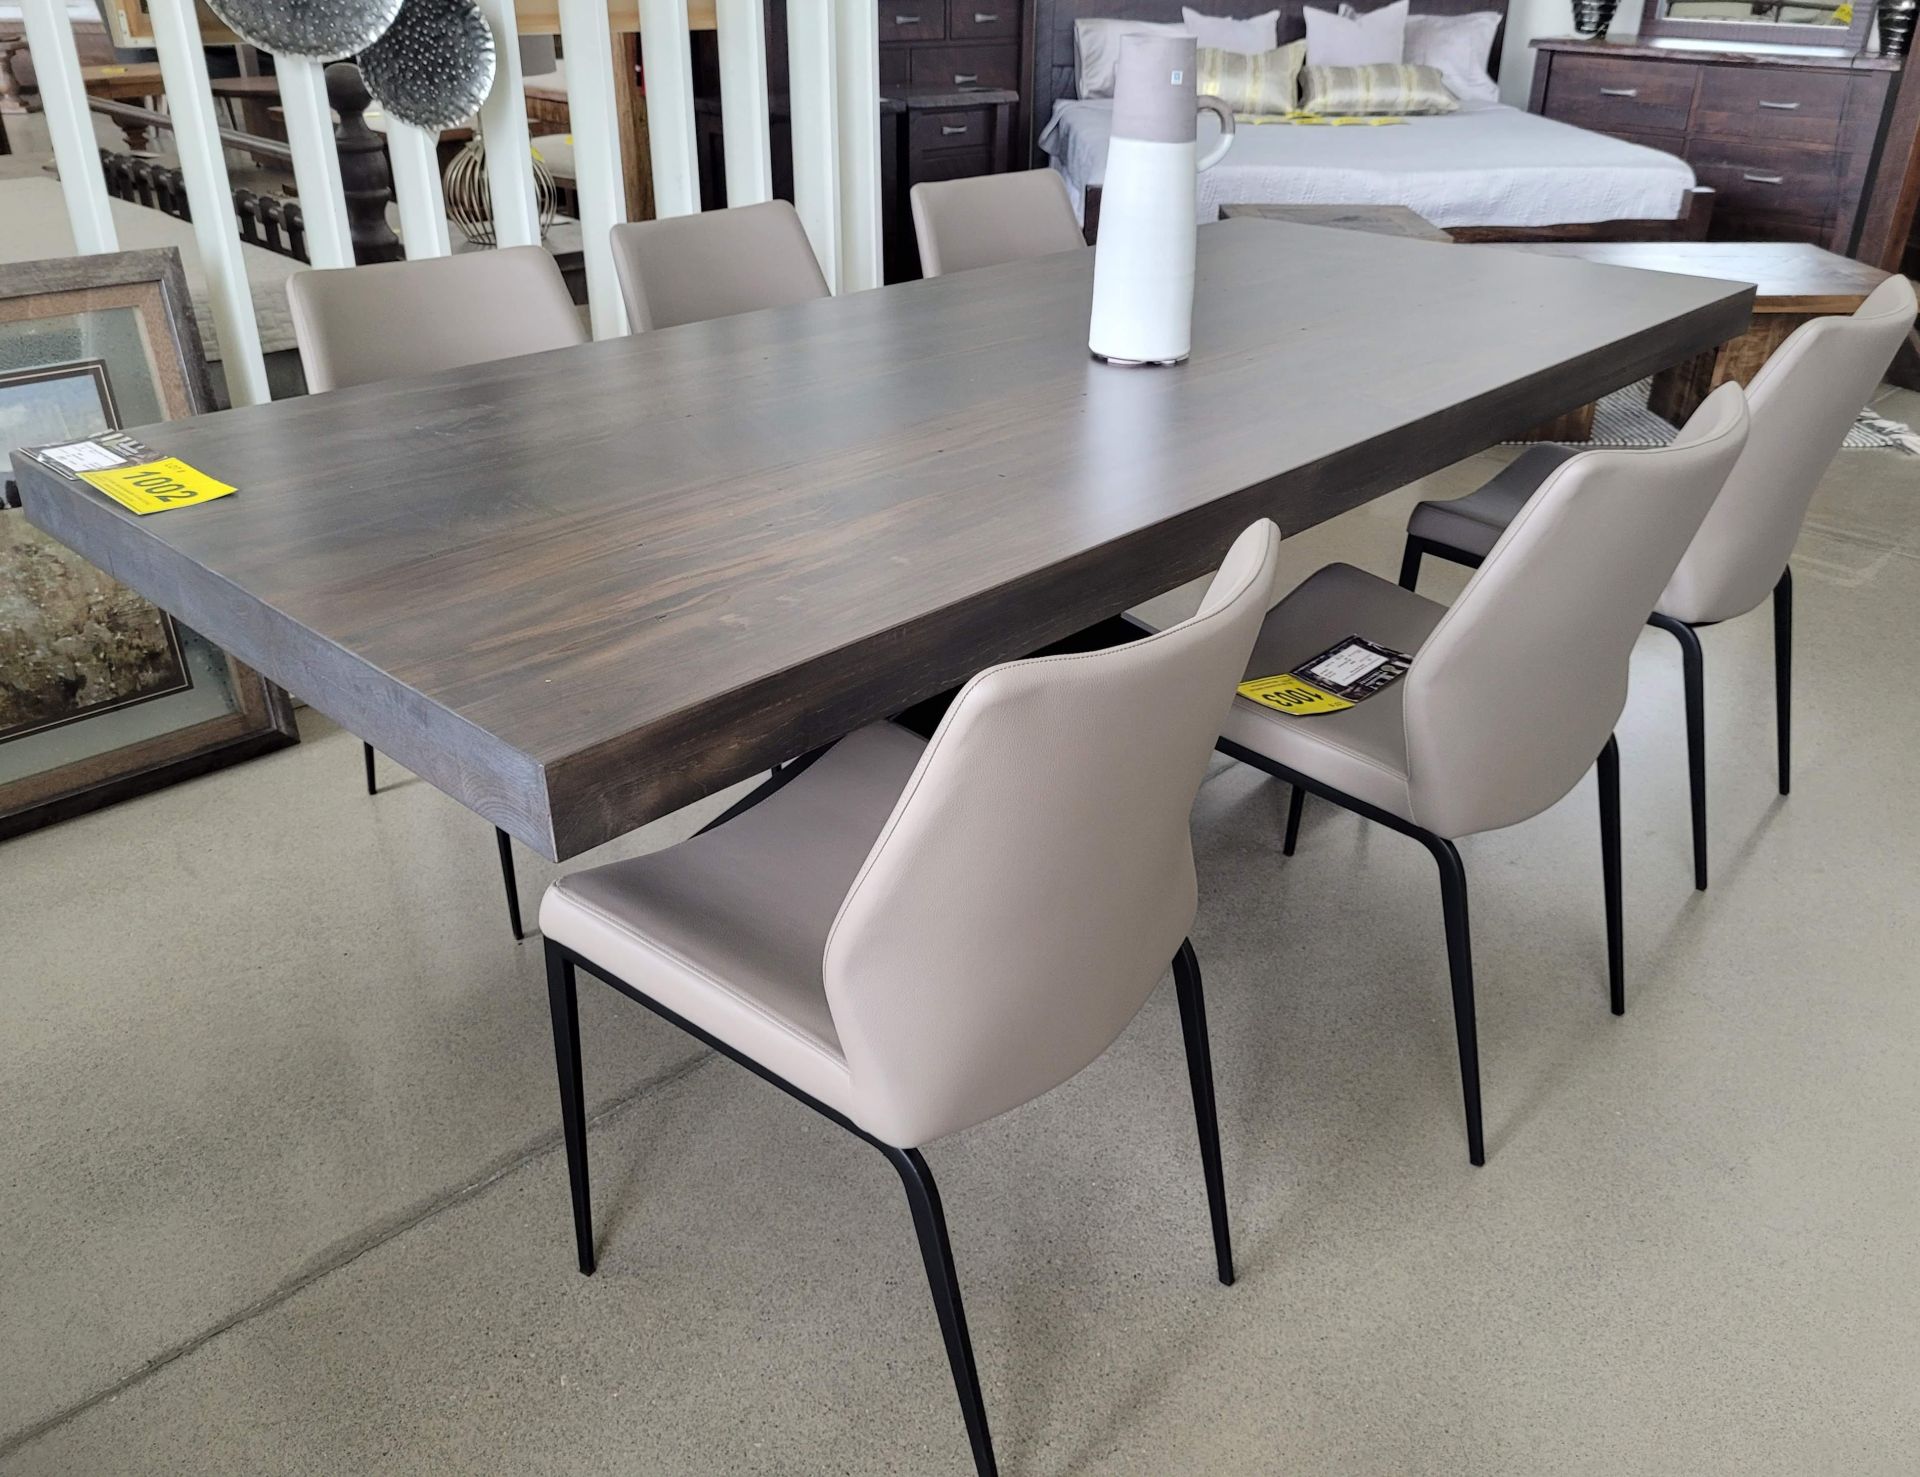 NEXUS DINING TABLE 42" X 96" SOLID TOP, STAIN: MOCHA SILK - MSRP $8,712.00 - (TABLE ONLY - CHAIRS - Image 9 of 9